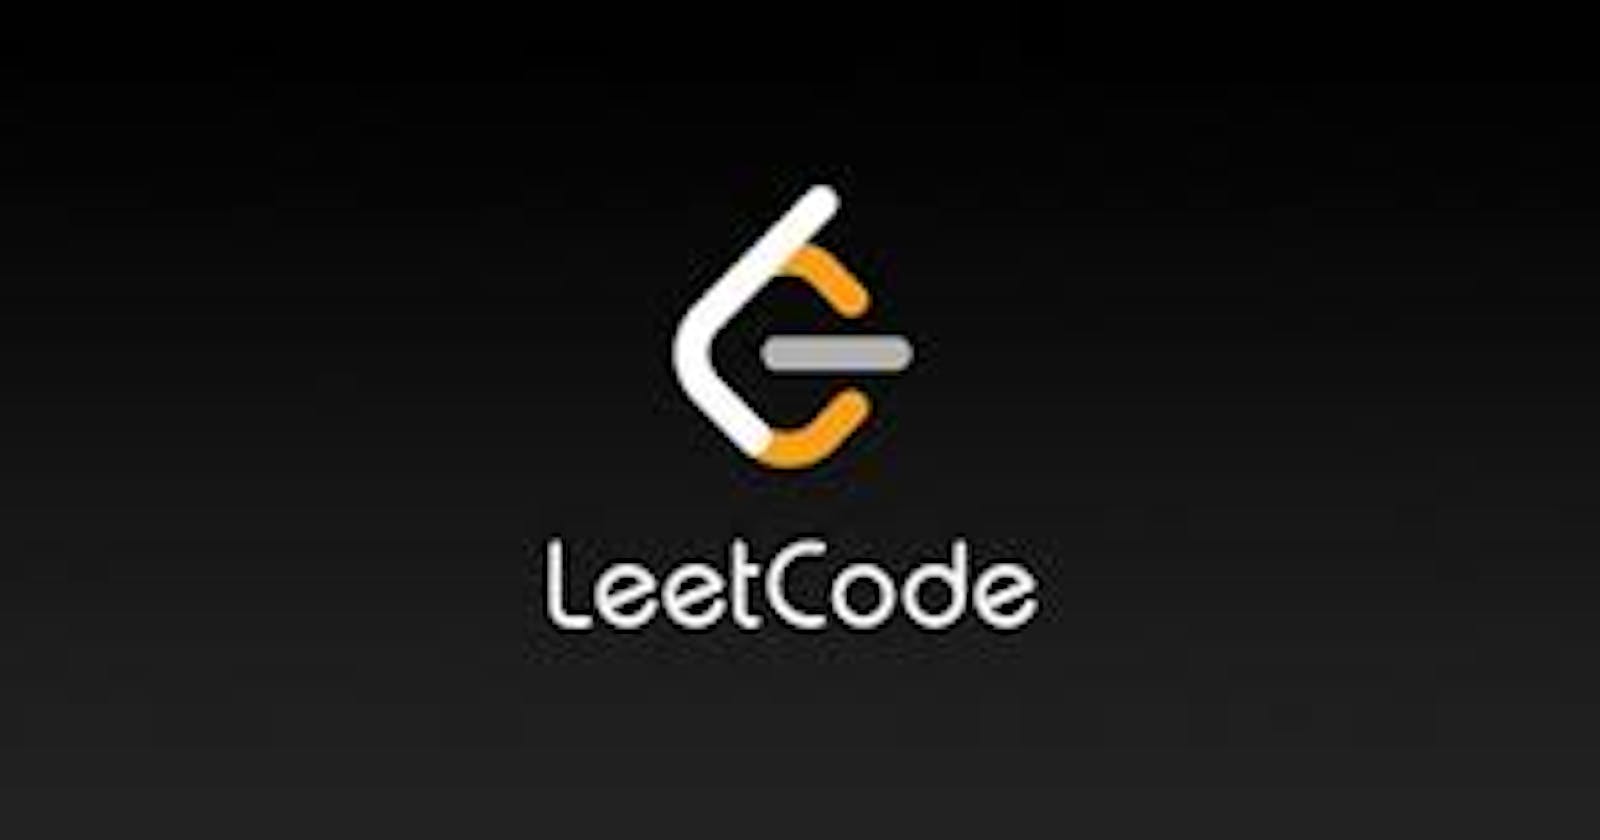 Why Leetcode is Important?